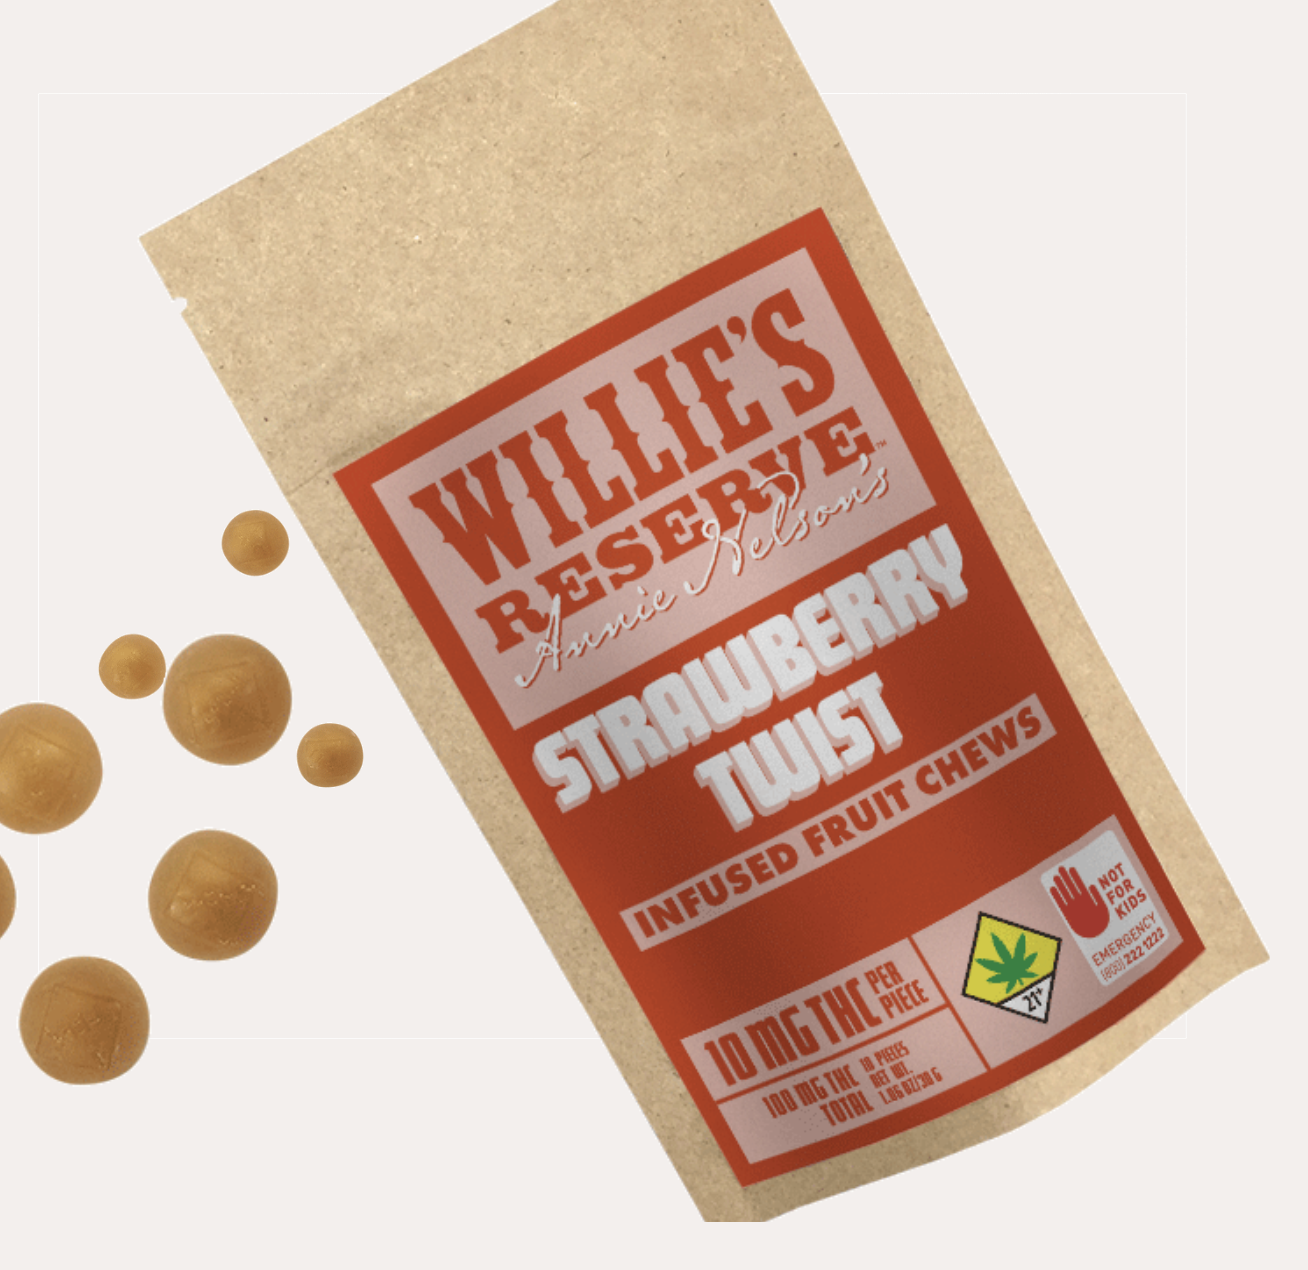 Willie's Reserve: Annie's Infused Fruit Chews